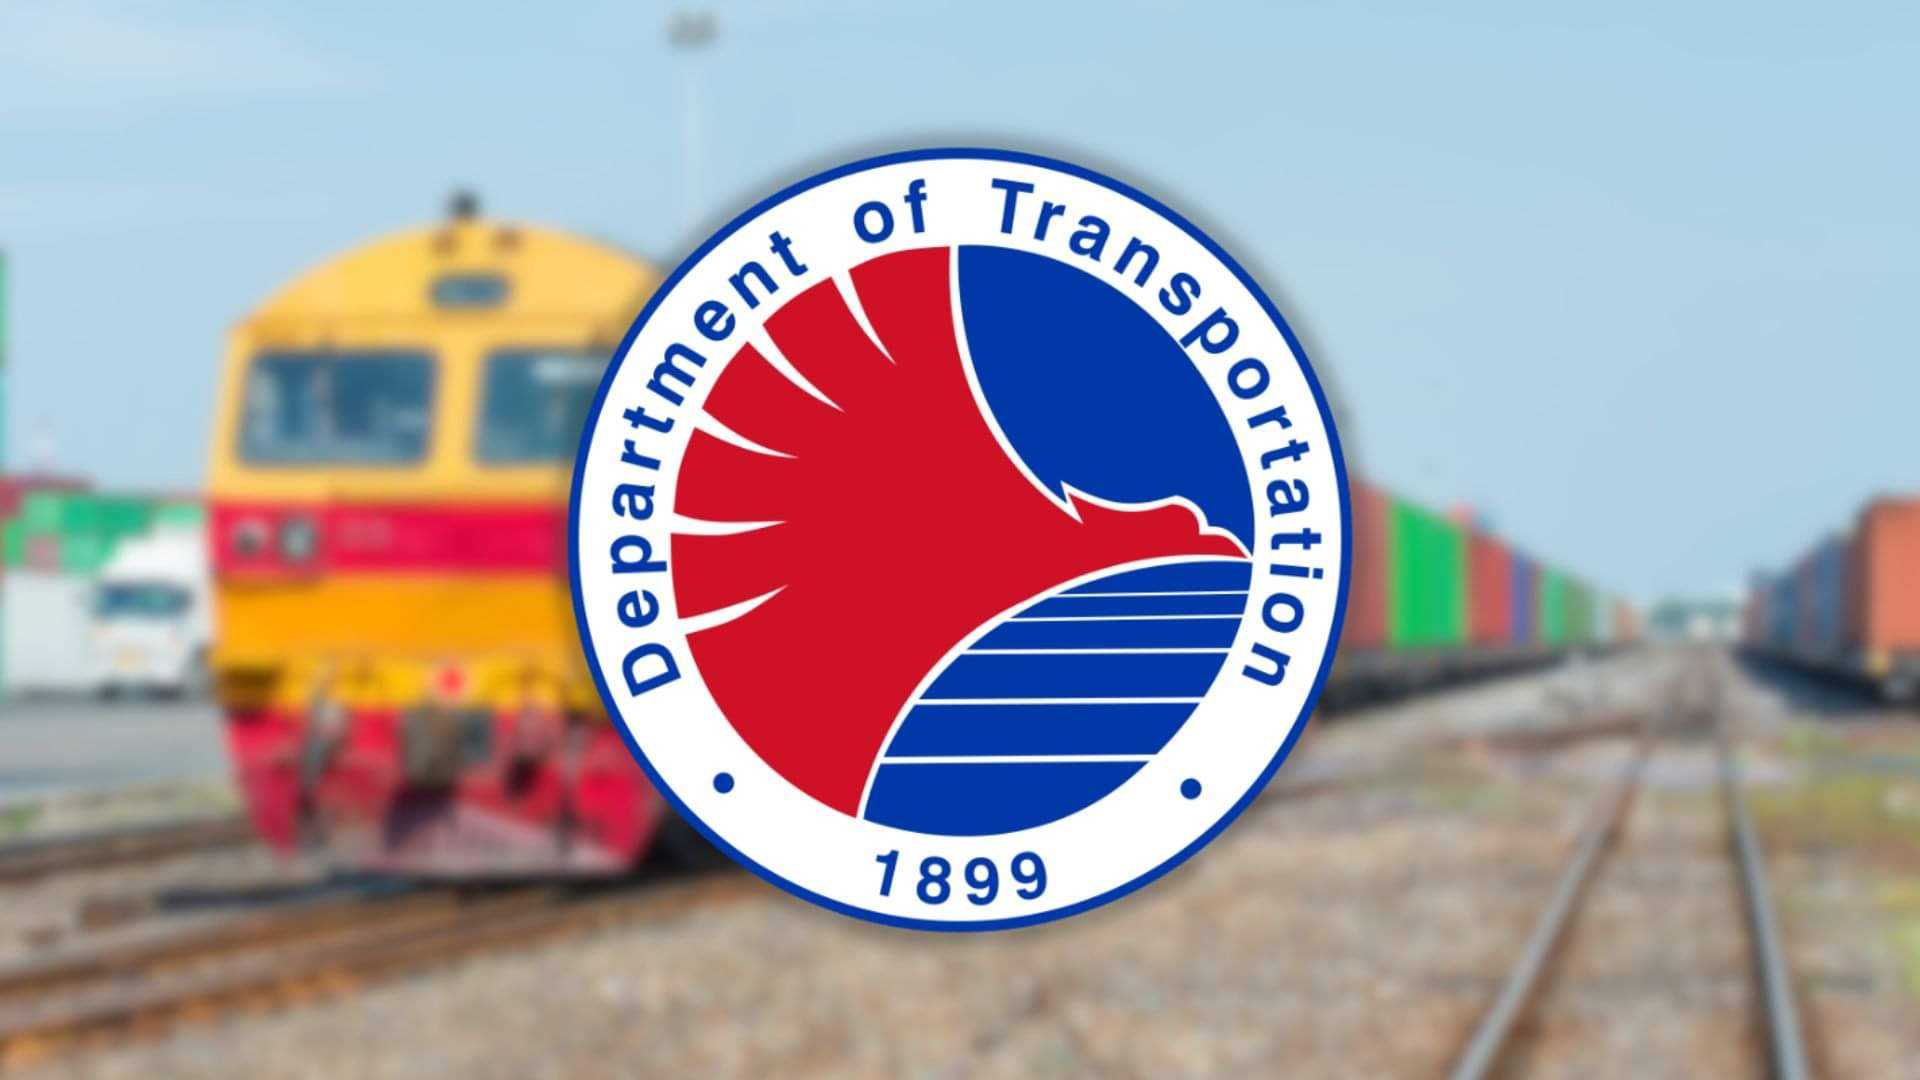 Two railway projects to revive PHL rail industry – DOTr